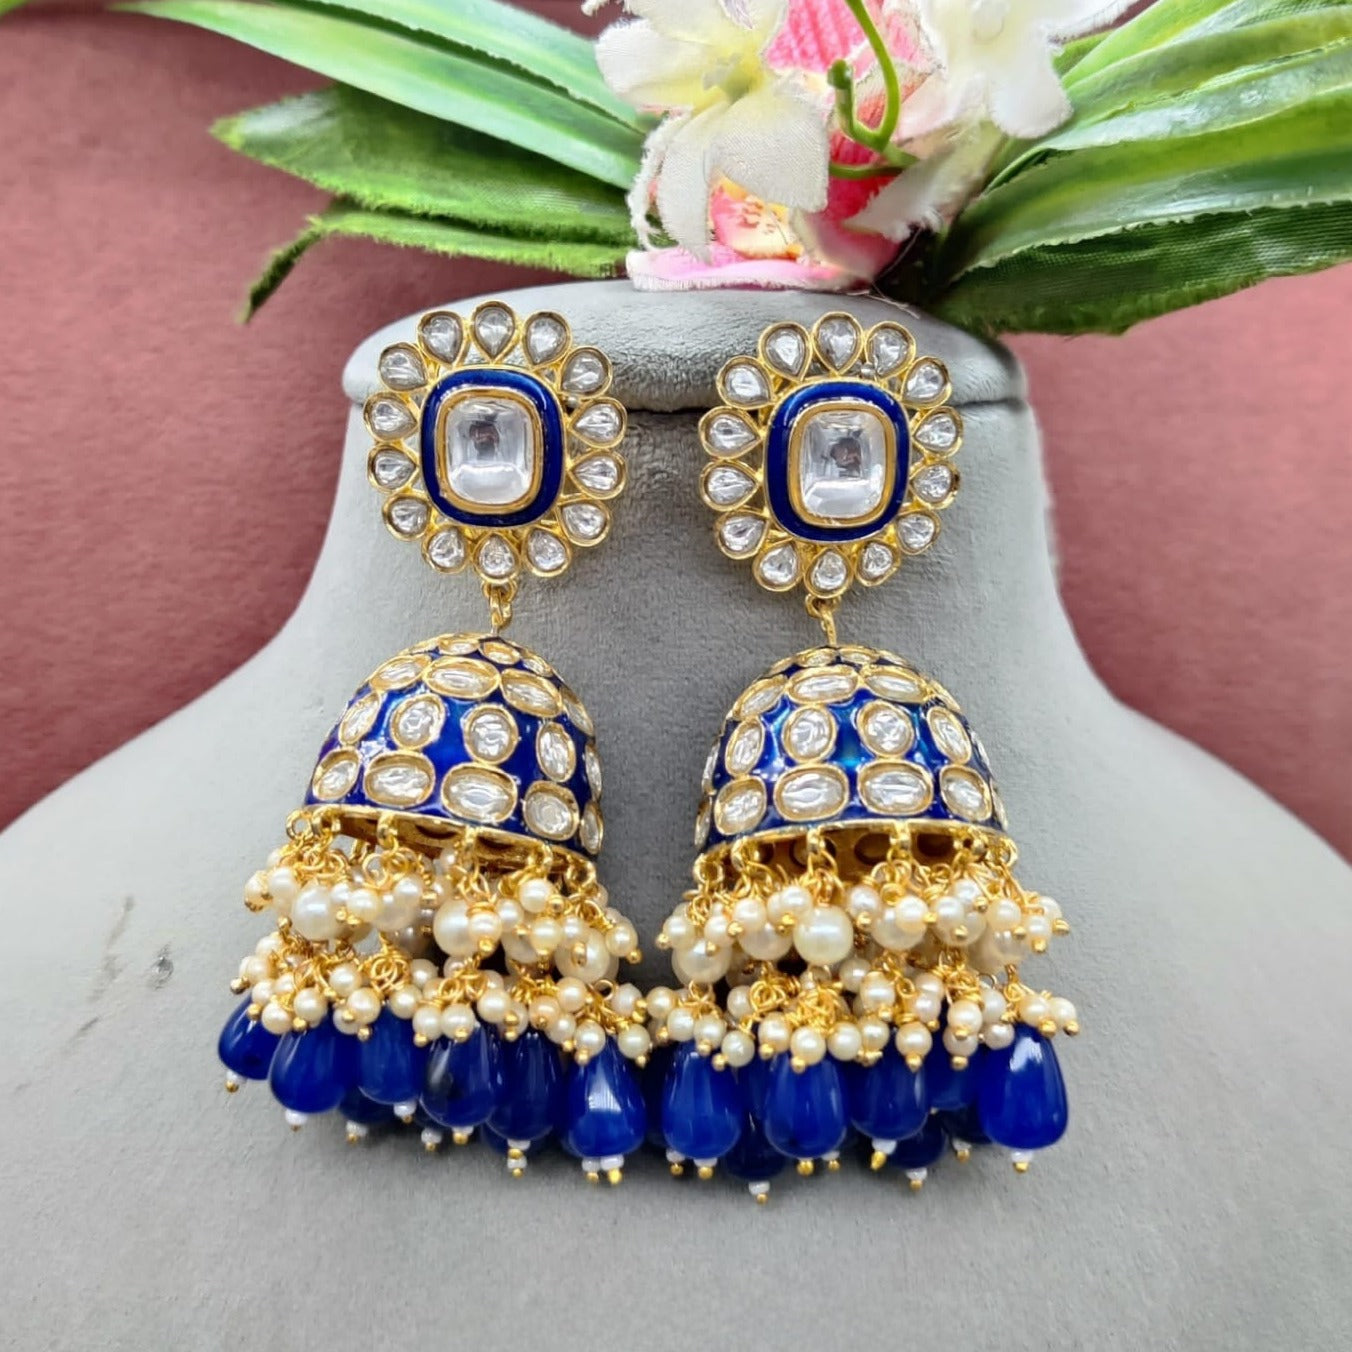 High-Quality Kundan Earrings for Timeless Elegance and Intricate Craftsmanship